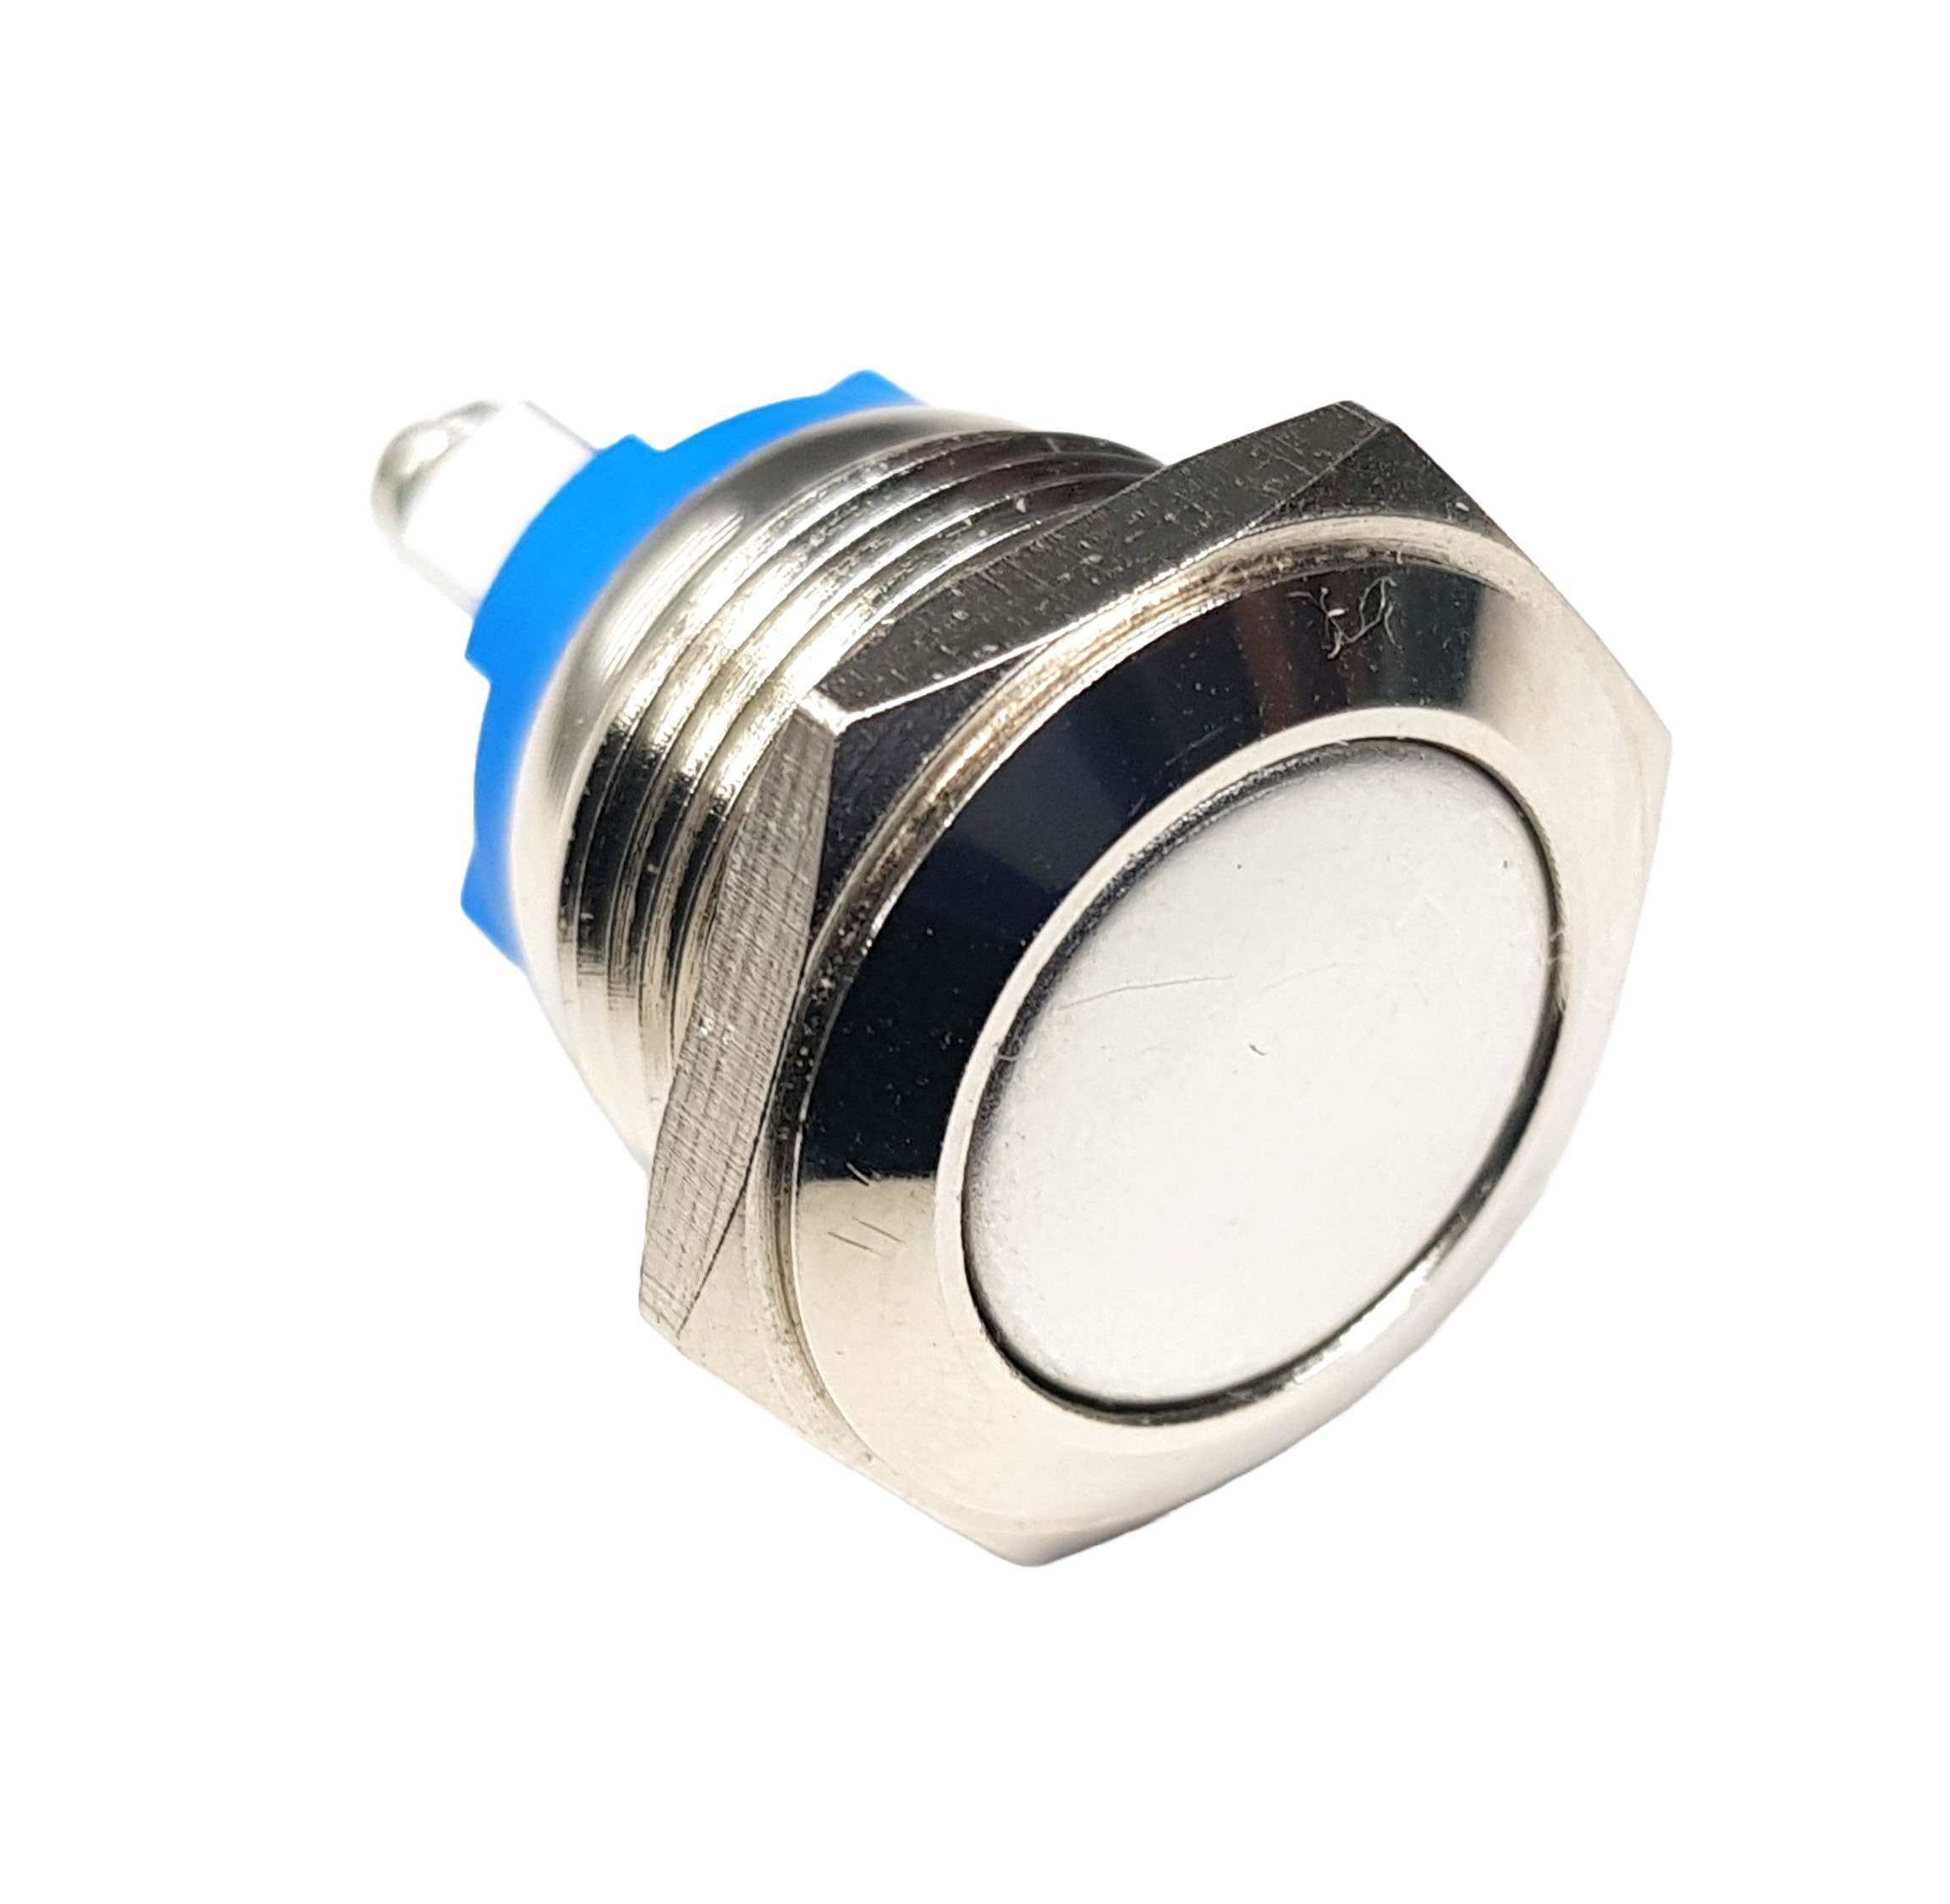 Momentary Push Button Switch, Silver Shell, IP65 Waterproof